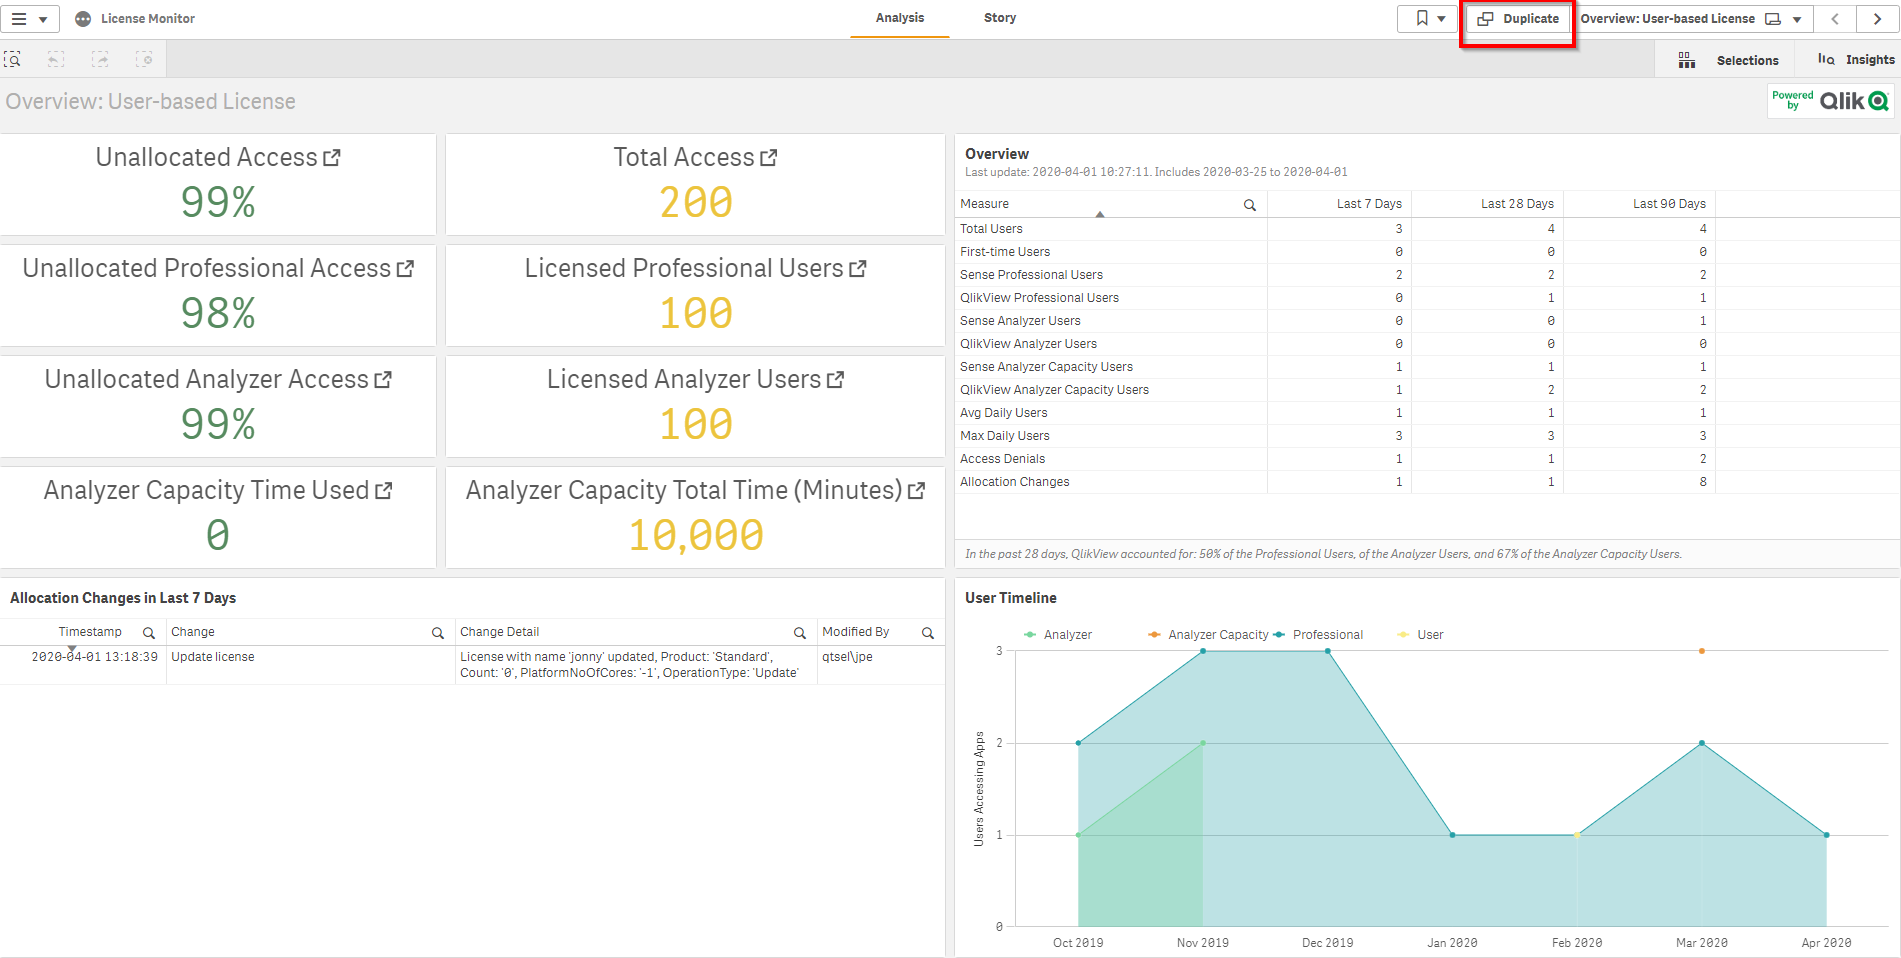 Analyze_Audit_License_Allocations_HUB_License_Monitor_App_Overview_Duplicate.png